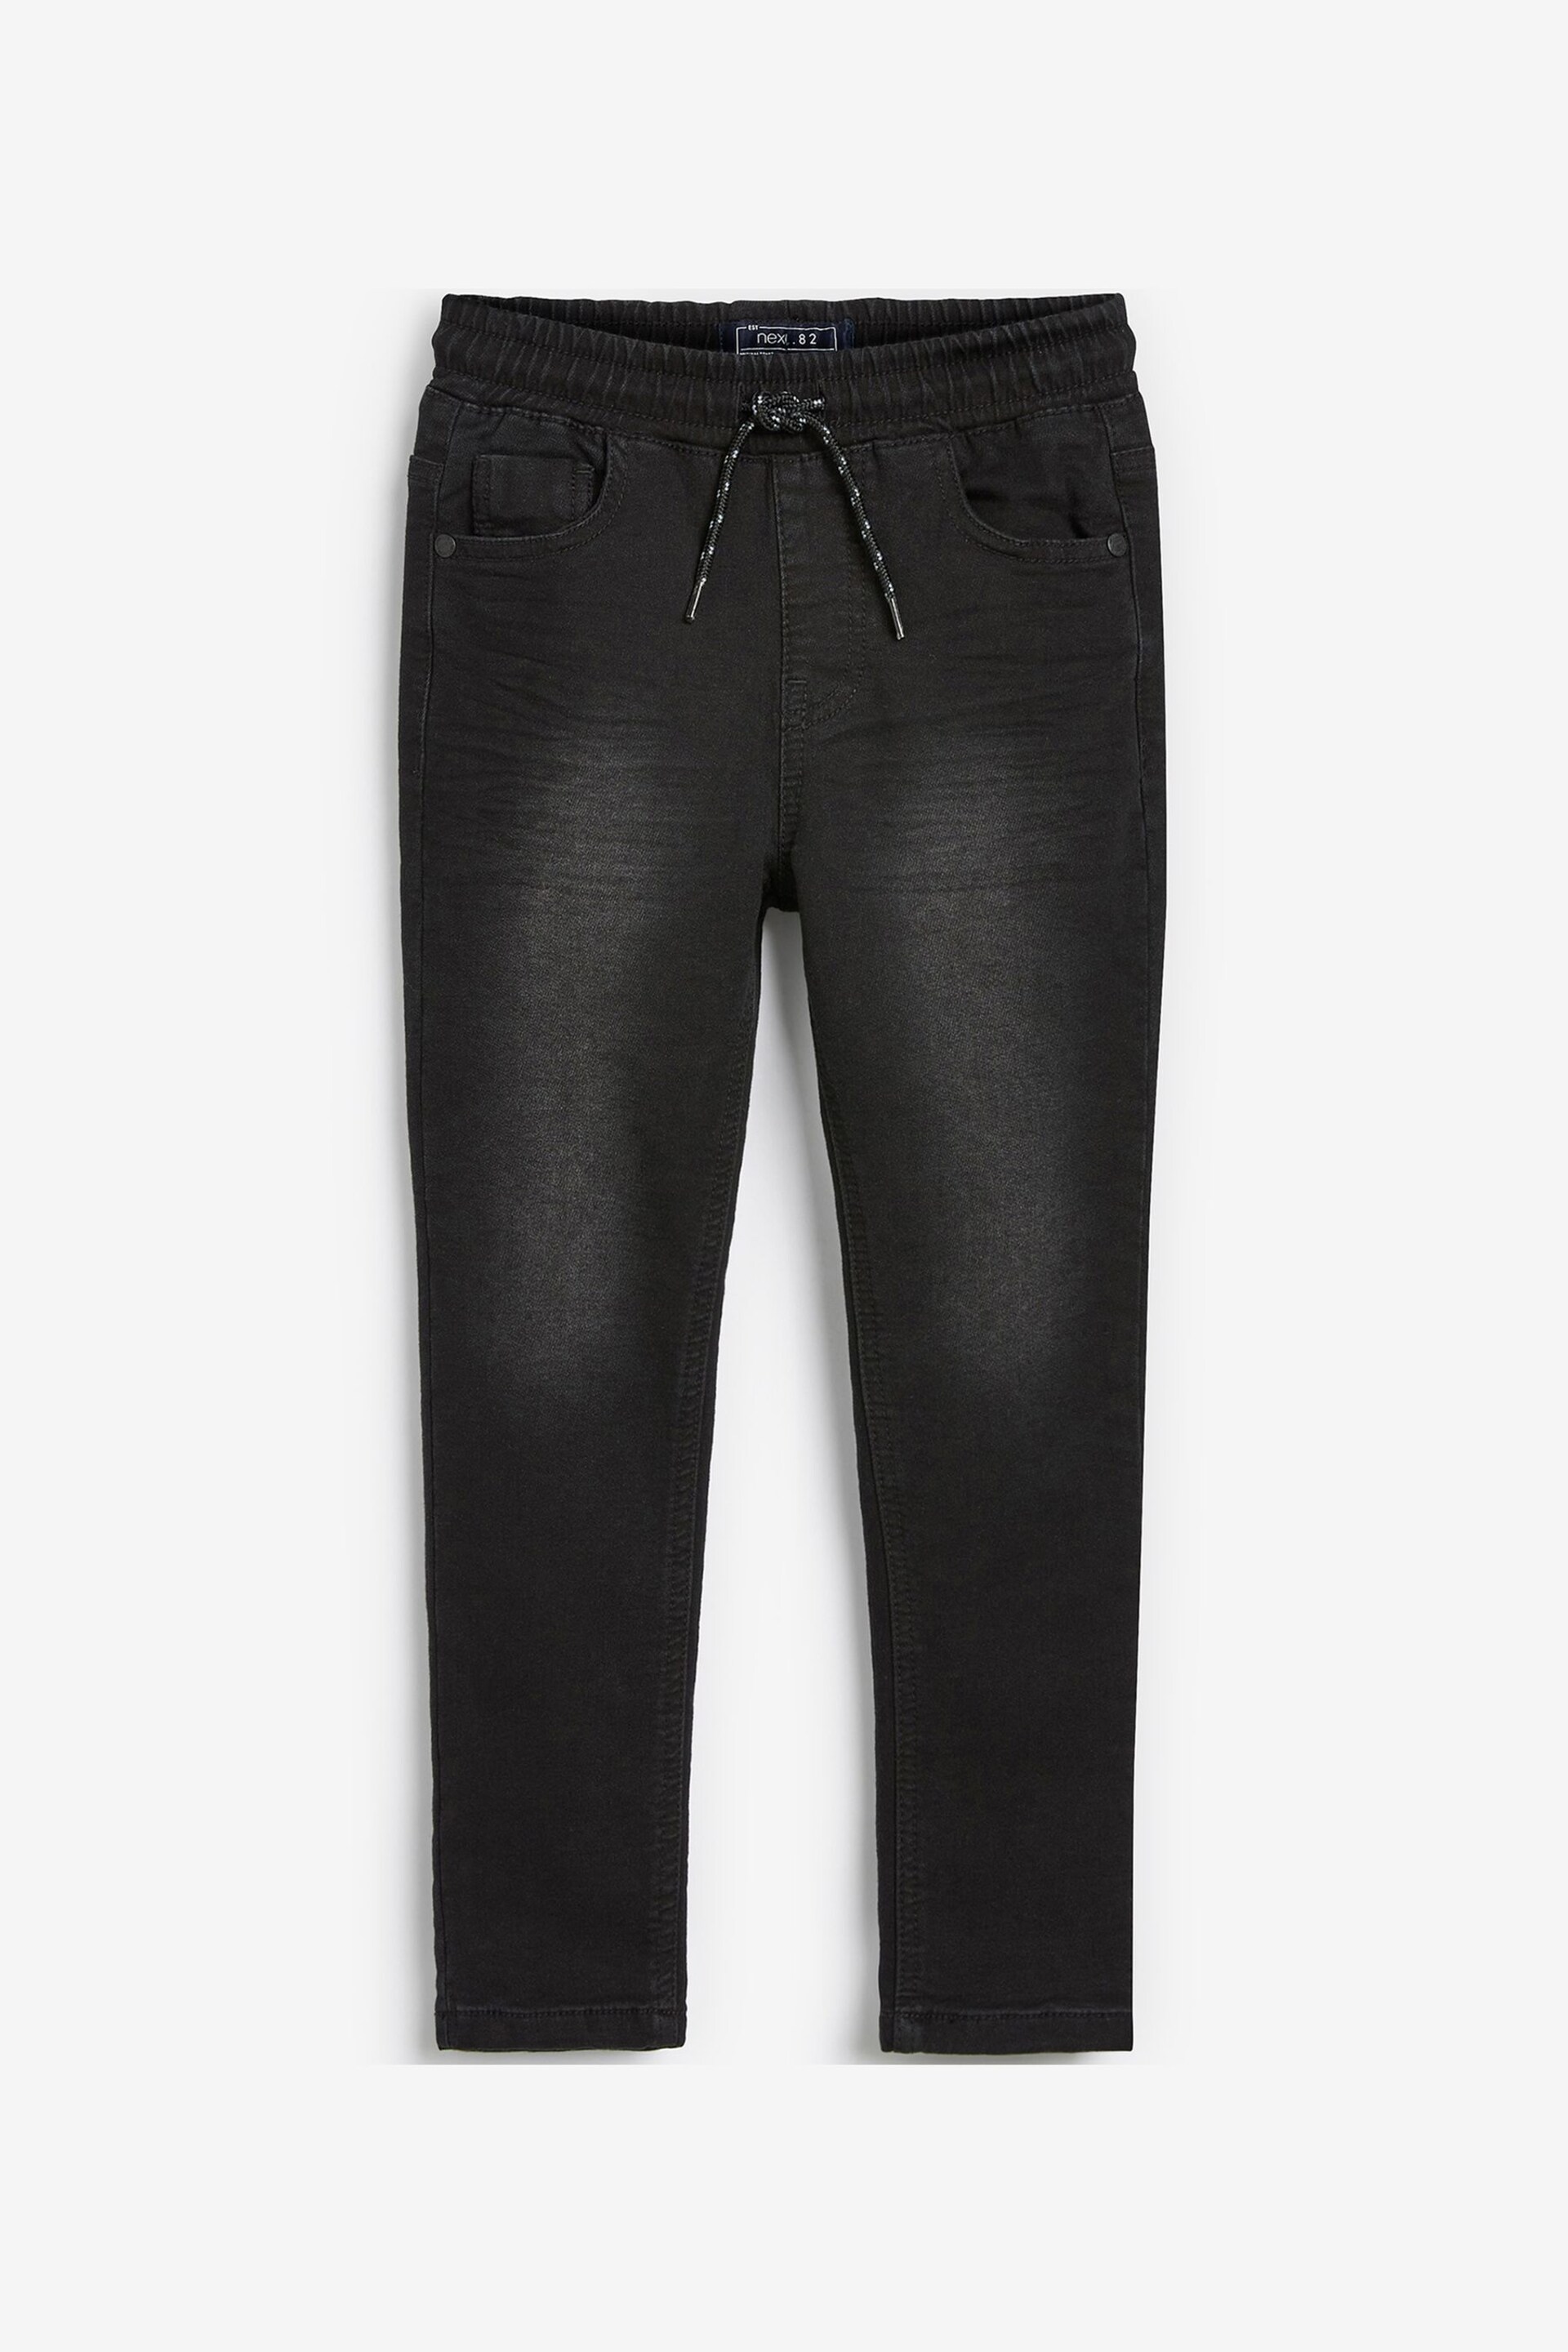 Black Skinny Fit Stretch Elasticated Waist Jeans (3-16yrs) - Image 1 of 3